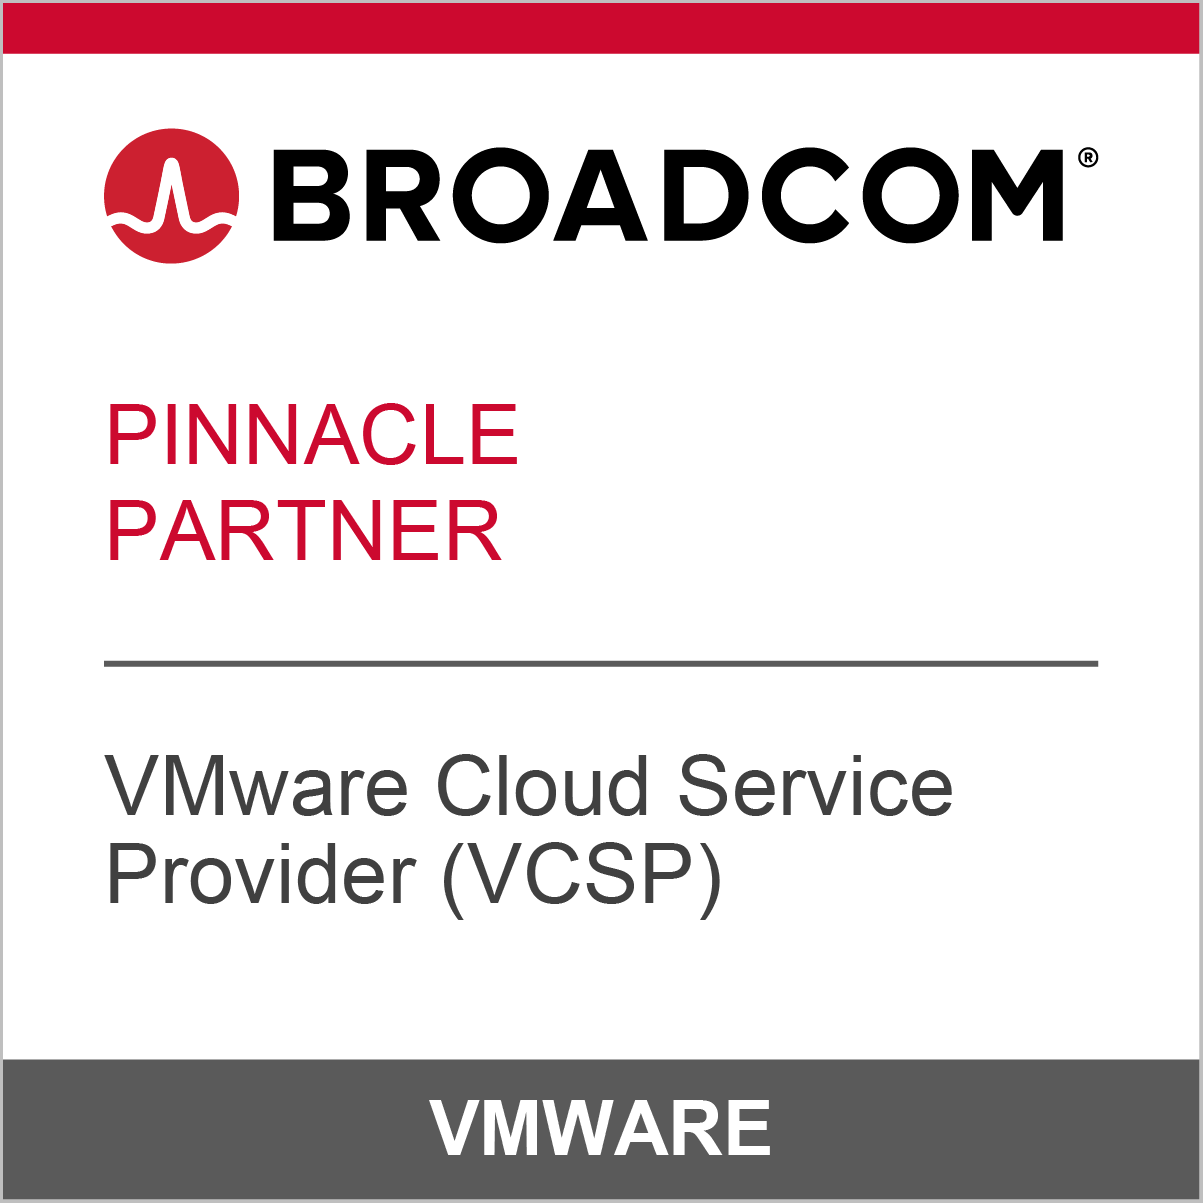 Expedient Names Pinnacle Partner with VMware by Broadcom